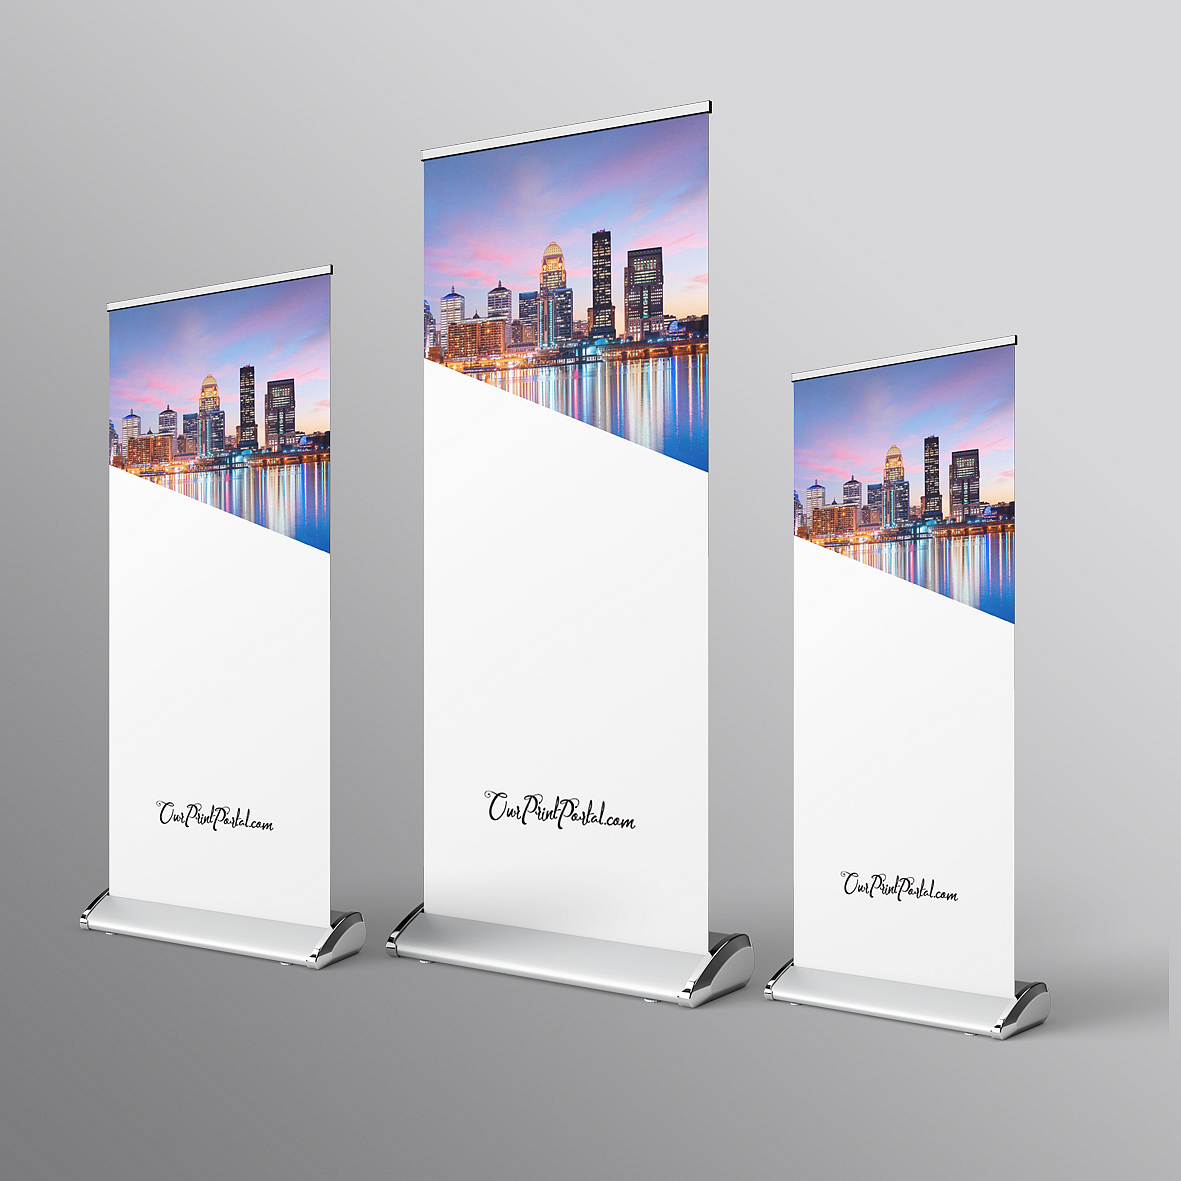 1200mm Wide Roller Banners